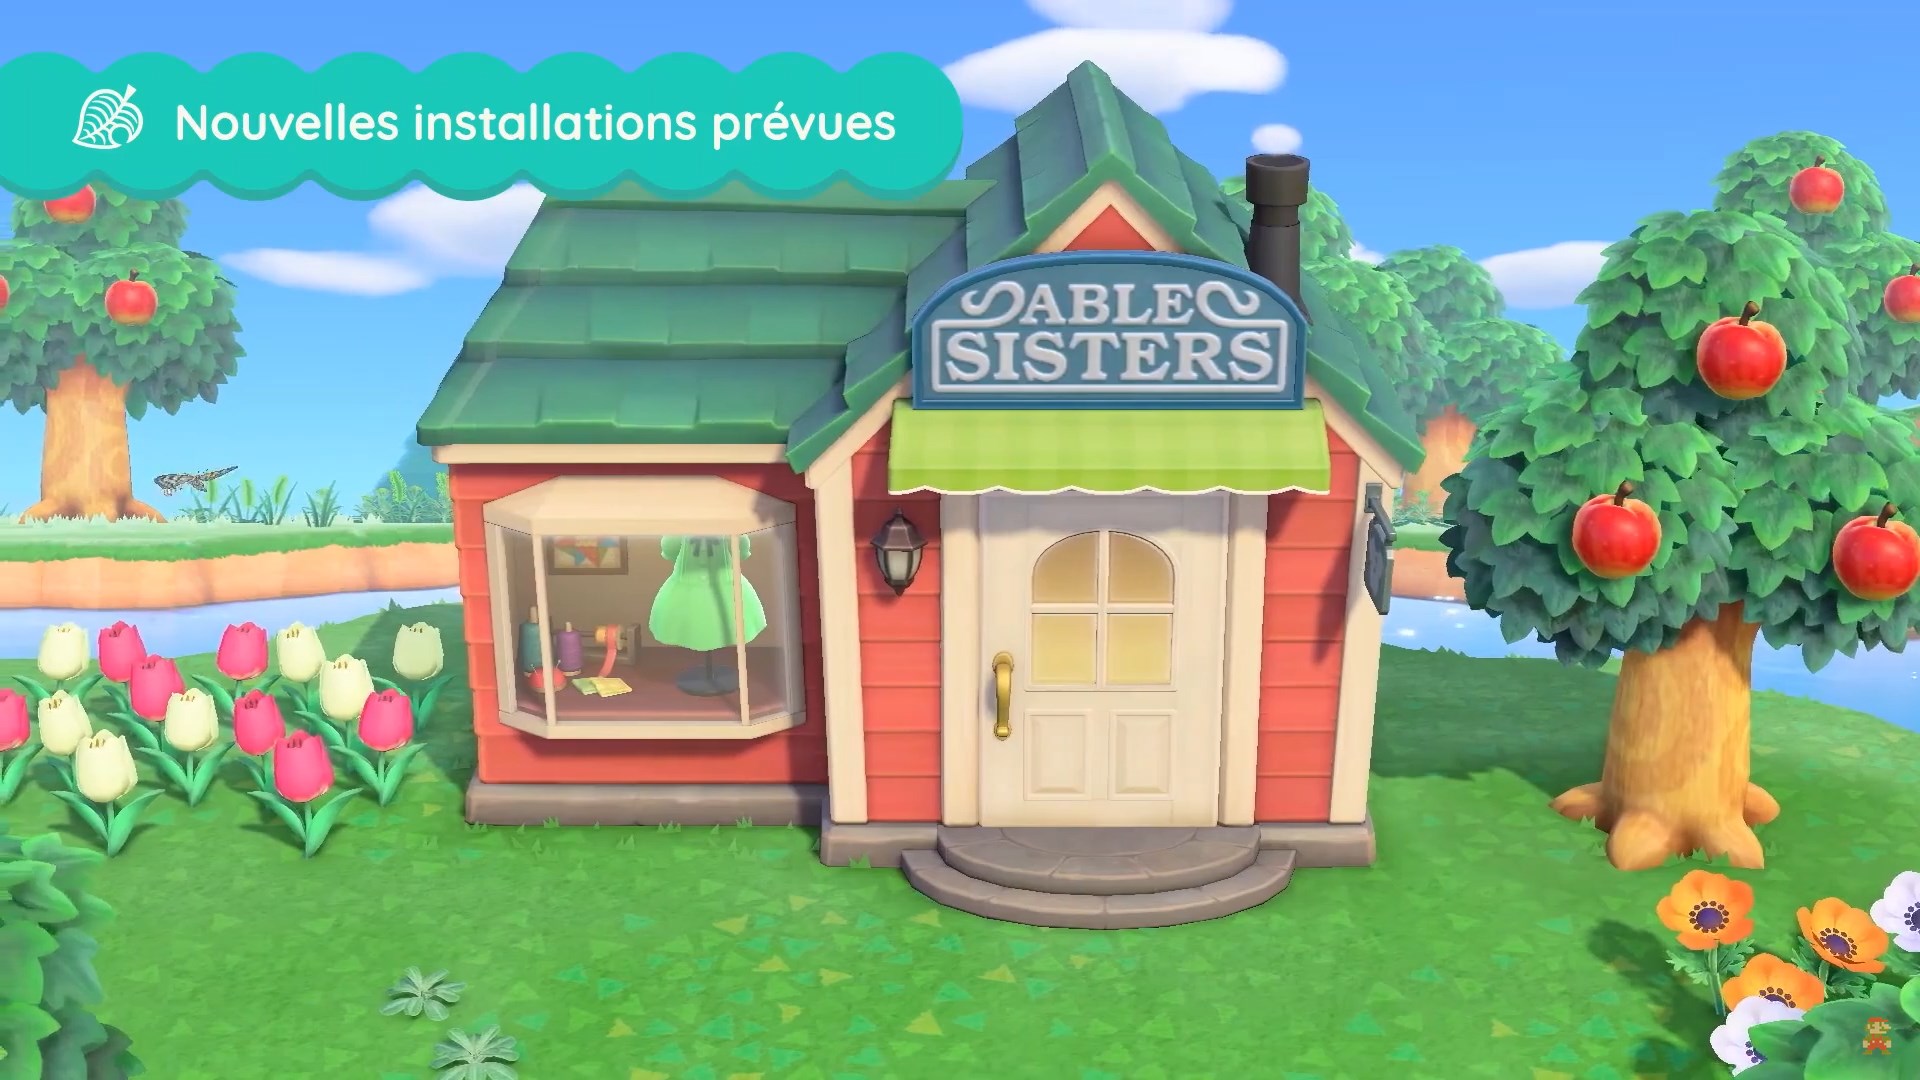 atelier-couture-animal-crossing-new-horizons